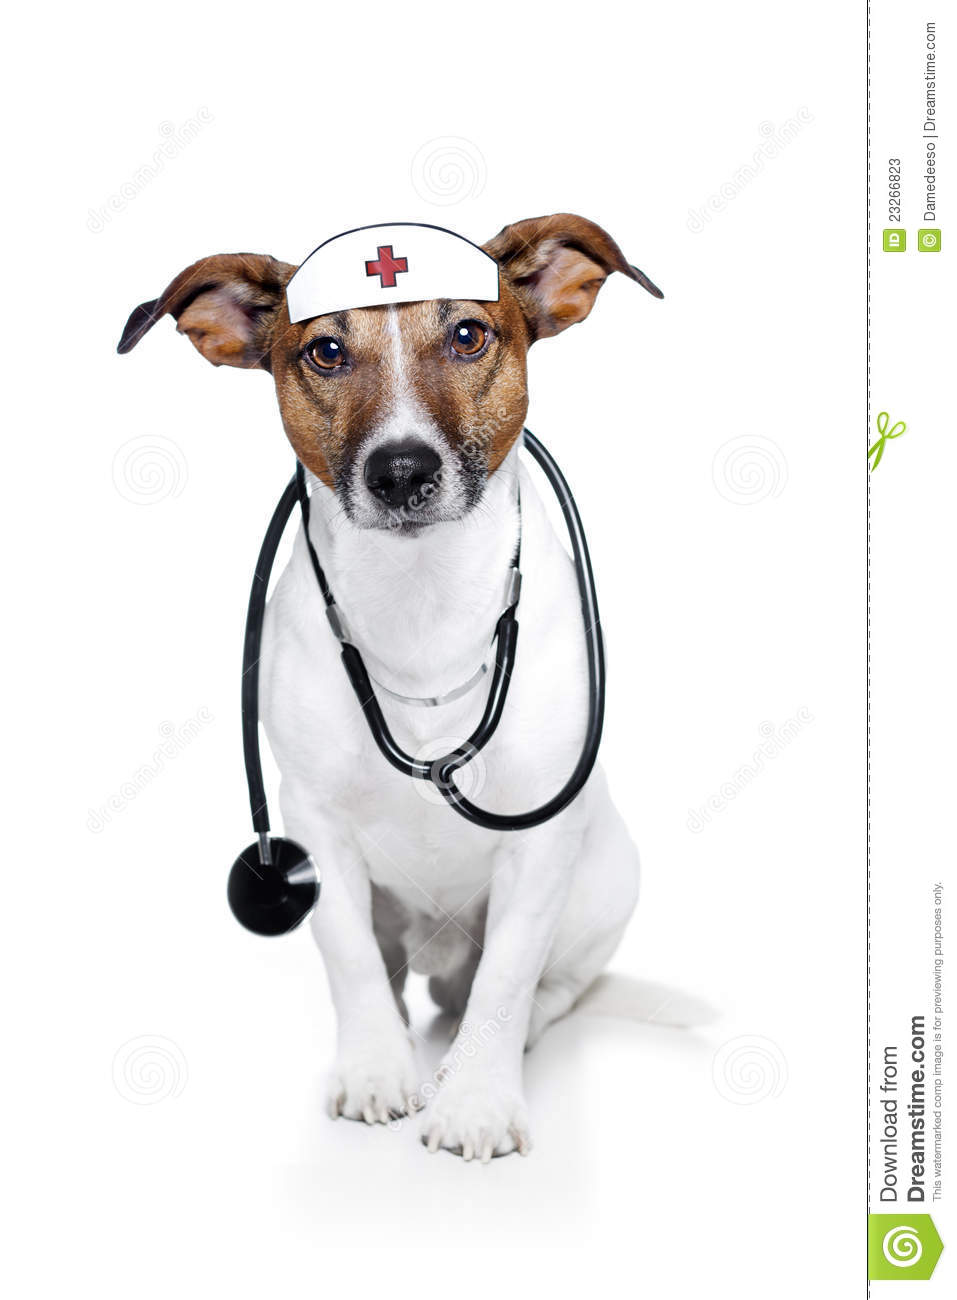 Dog As A Nurse A Stethoscope And Looking